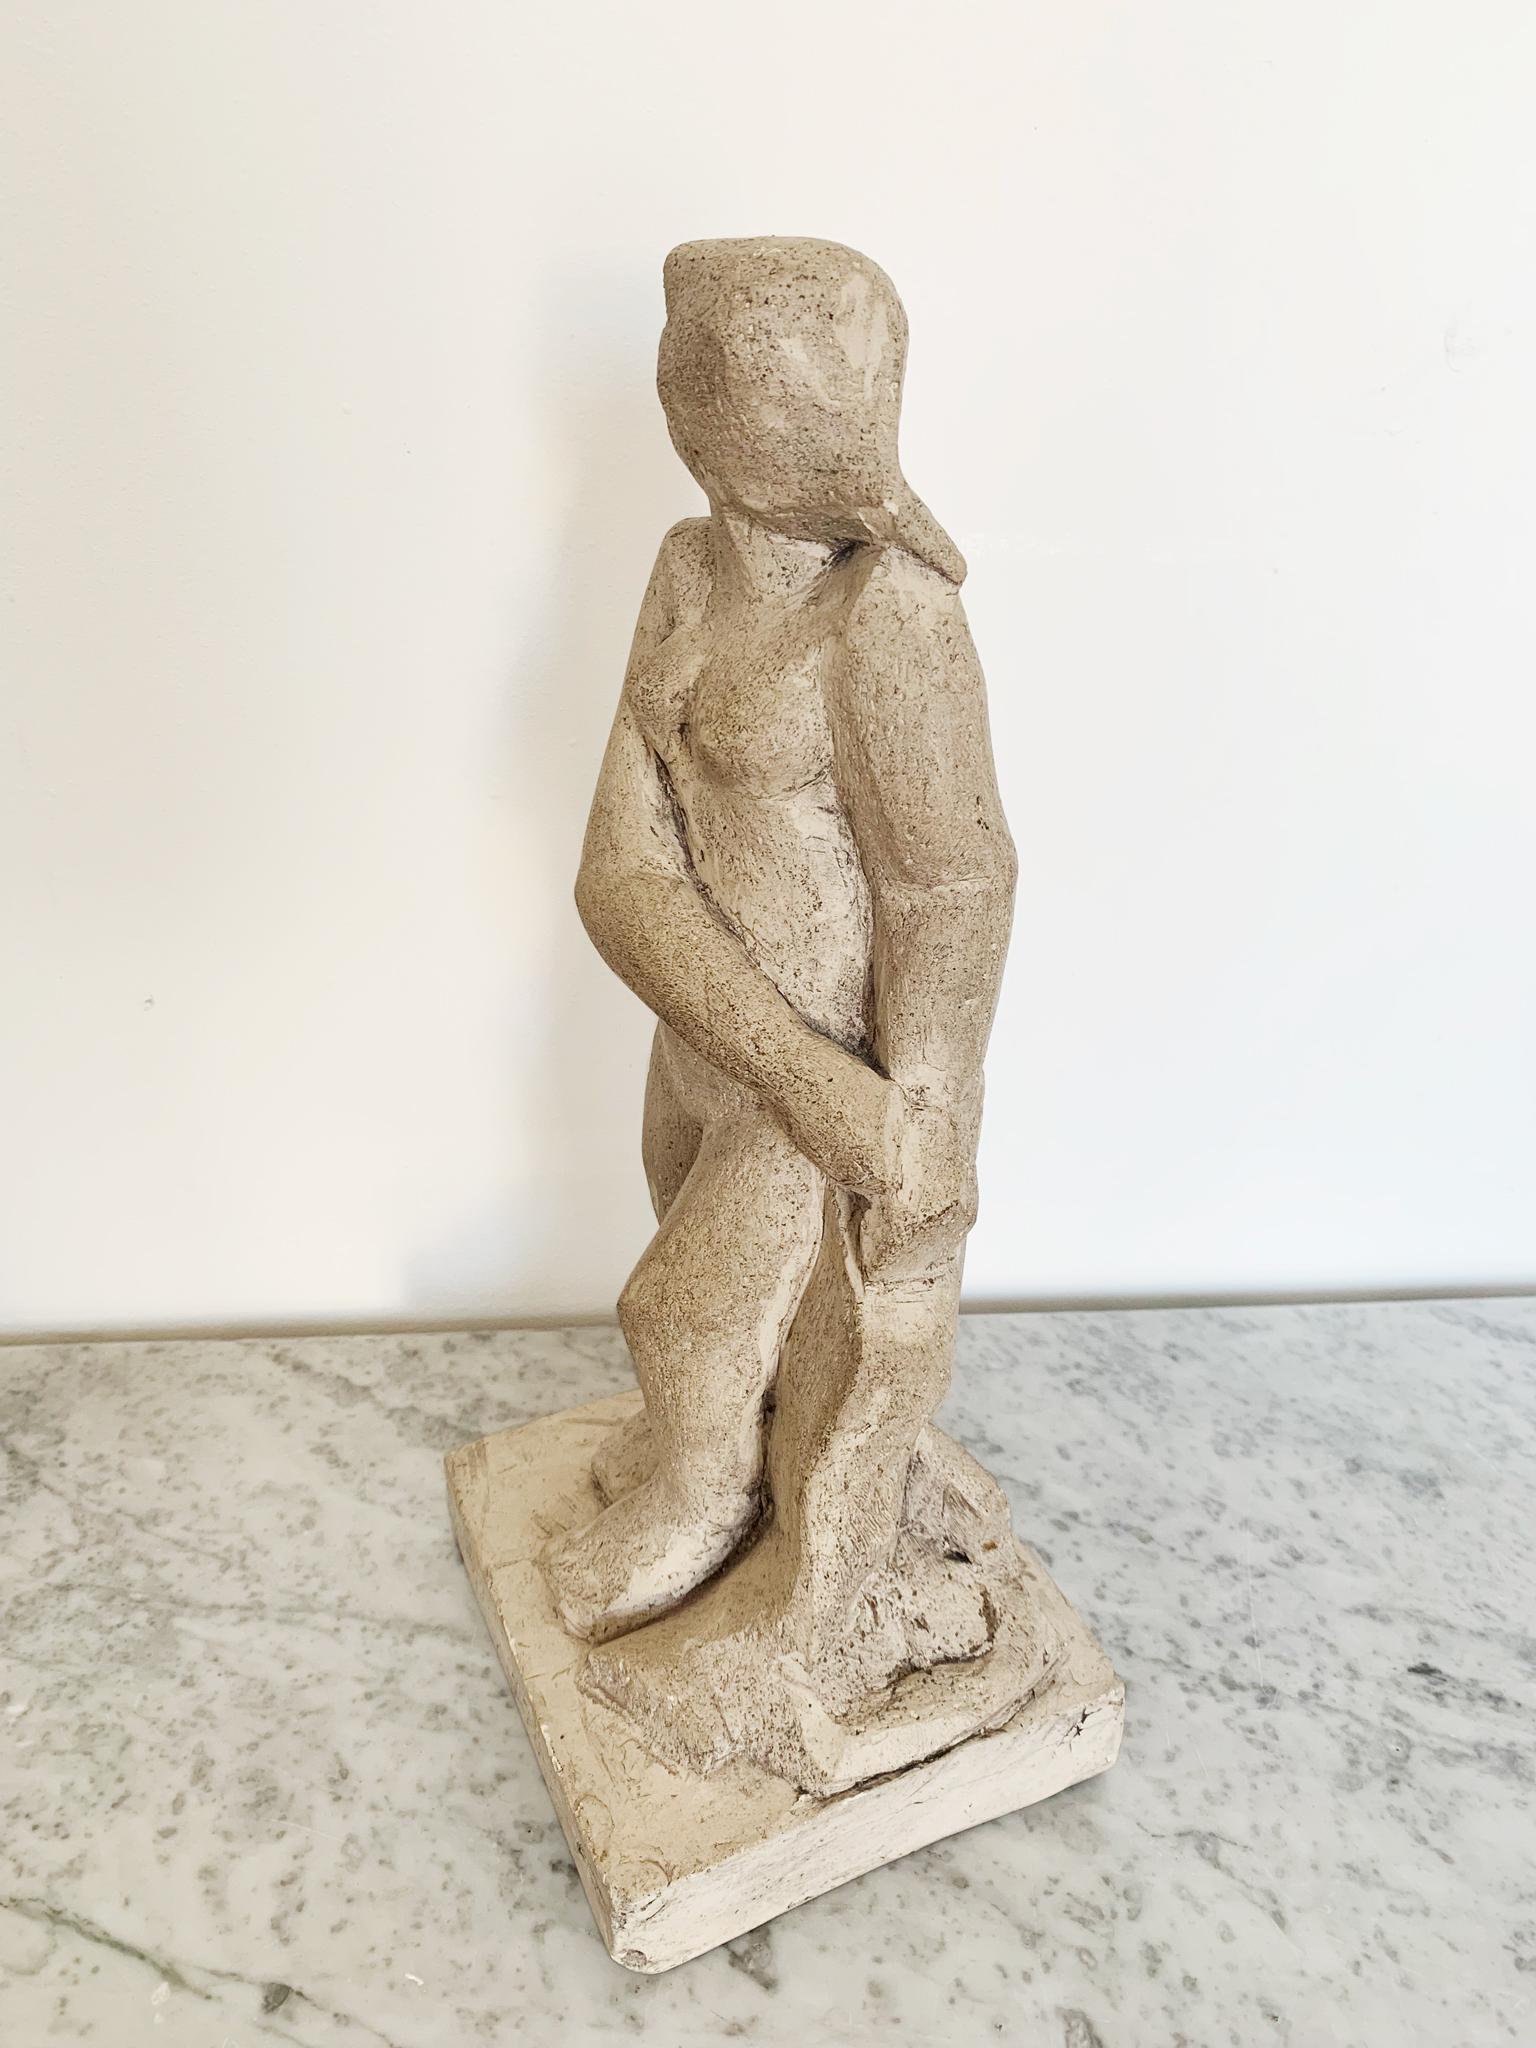 Cubist style plaster sculpture by Jean Jacques Deschamps - Late 20th Century.

Born in Angers in 1932. Jean -Jacques works in a number of mediums.

Studied at the Ecole des Beaux-Arts in Angers and after l'Ecole Nationale Supérieure des Beaux-Arts